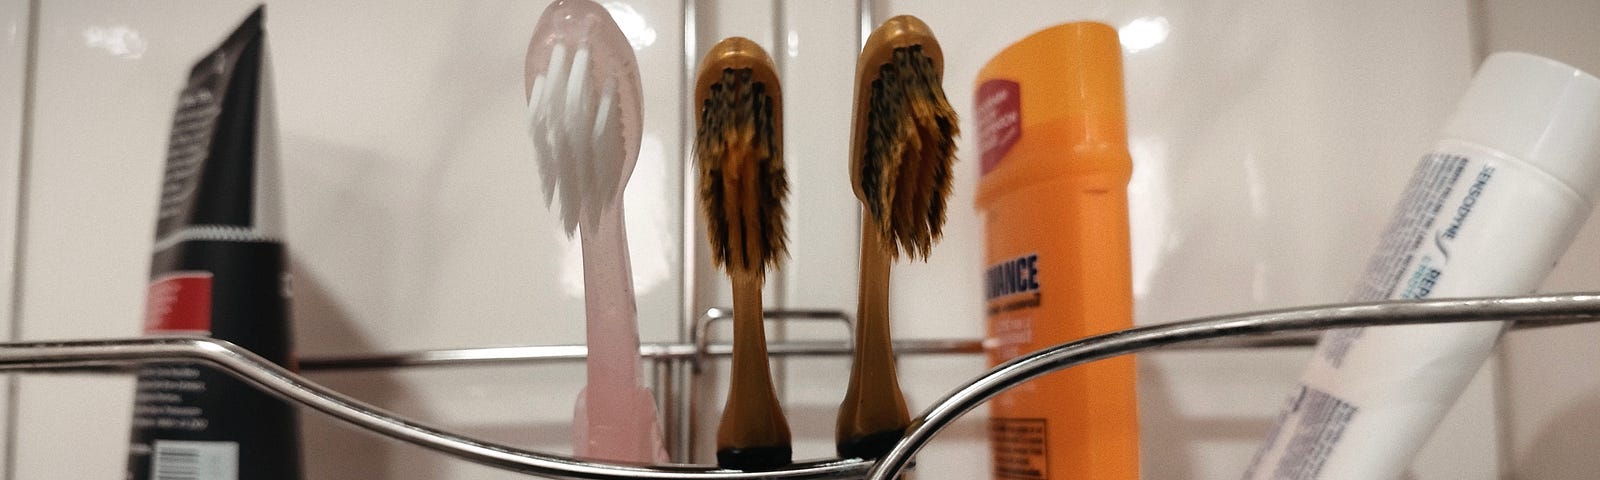 Photo of three toothbrushes in the author’s bathroom.